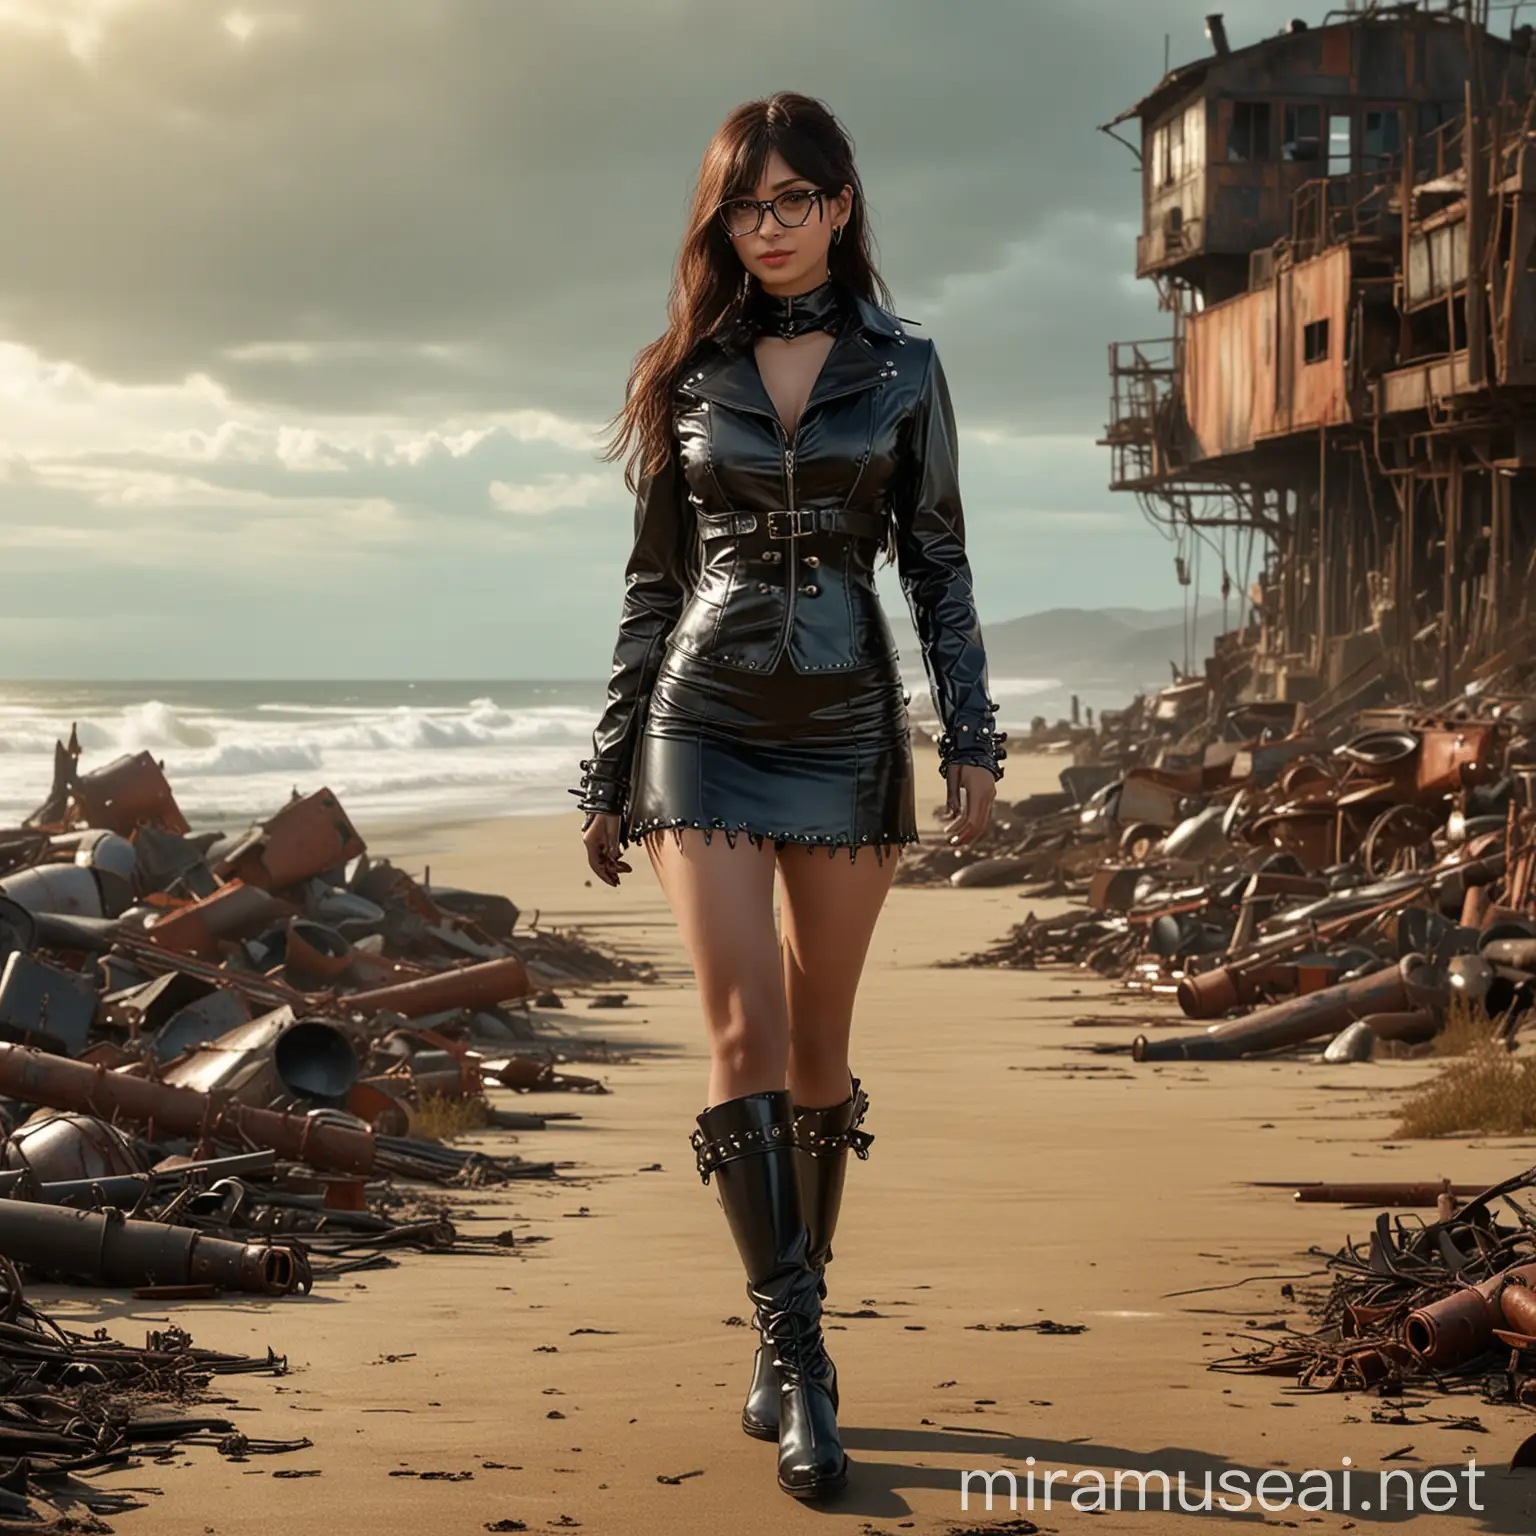 LatexClad Fallout Fantasy Aiko Daughter of Mia Khalifa and Hitomi Tanaka Emerges in Steampunk World